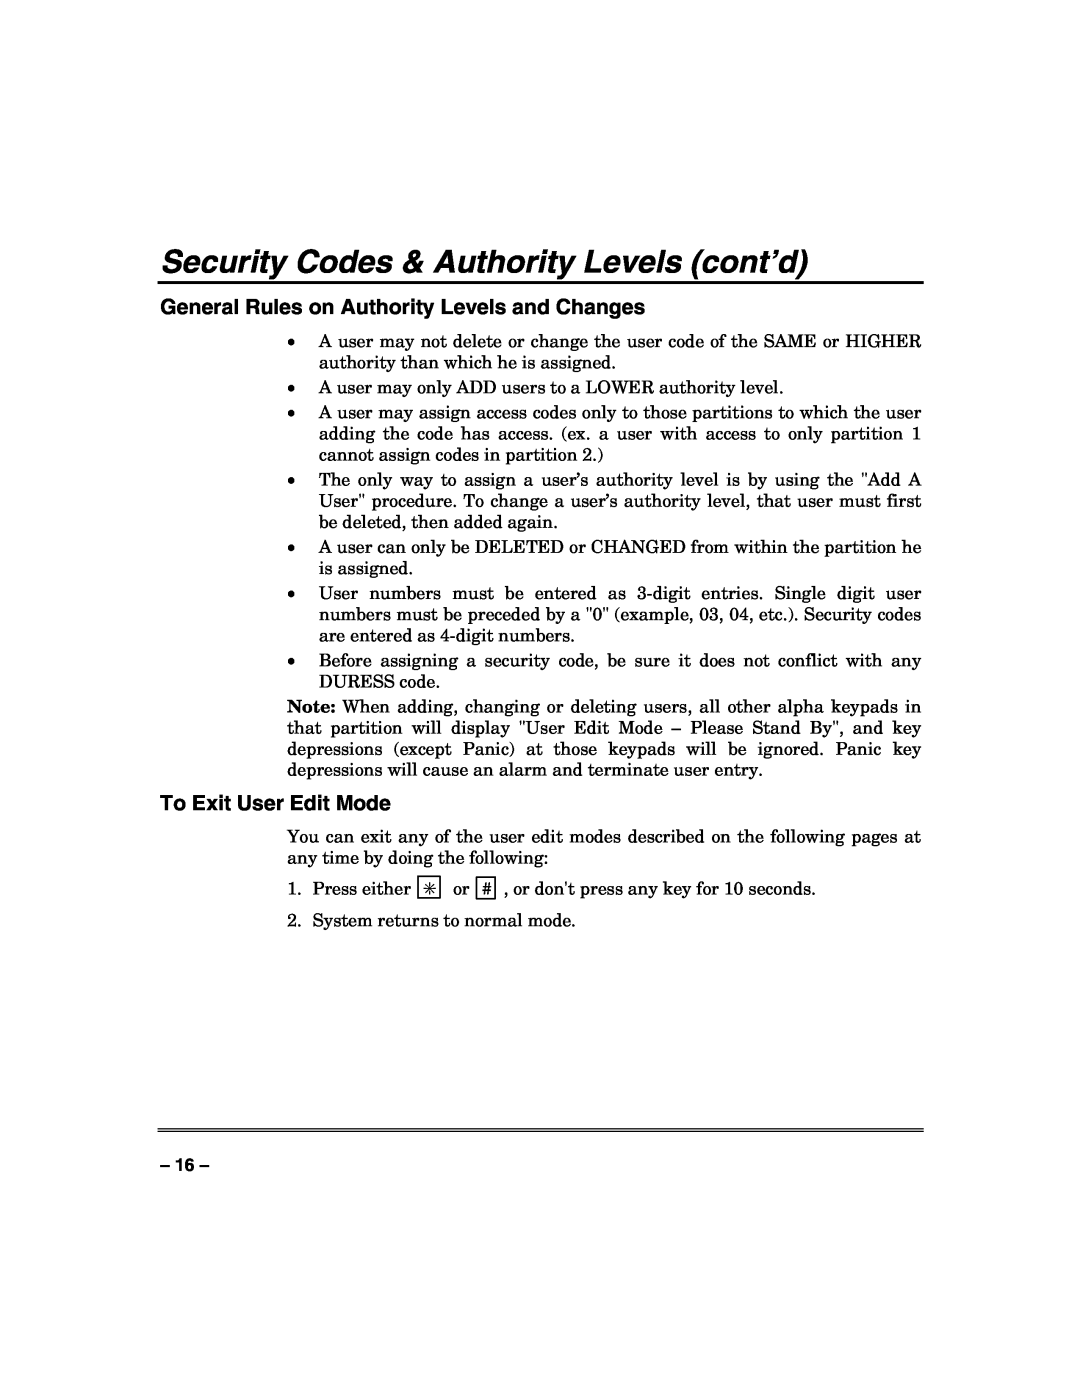 Honeywell VISTA-50PUL manual General Rules on Authority Levels and Changes, To Exit User Edit Mode 